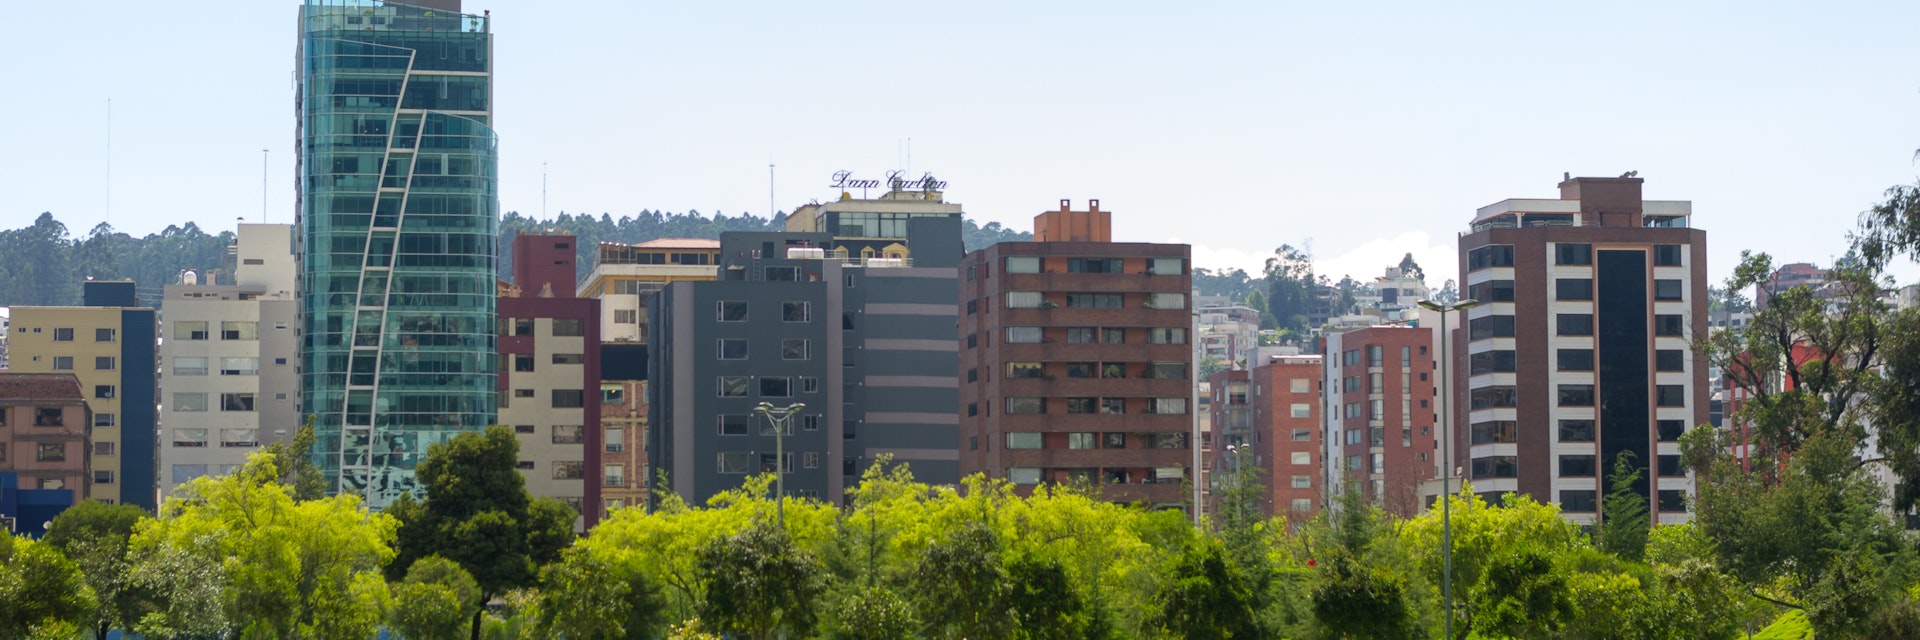 QUITO, ECUADOR- MARCH 20, 2015: Inside La Carolina park in Quito, Ecuador. Beautiful green outdoors with some tall office buildings marking the city presence.; Shutterstock ID 320378906; Your name (First / Last): Josh Vogel; GL account no.: 56530; Netsuite department name: Online Design; Full Product or Project name including edition: Digital Content/Sights